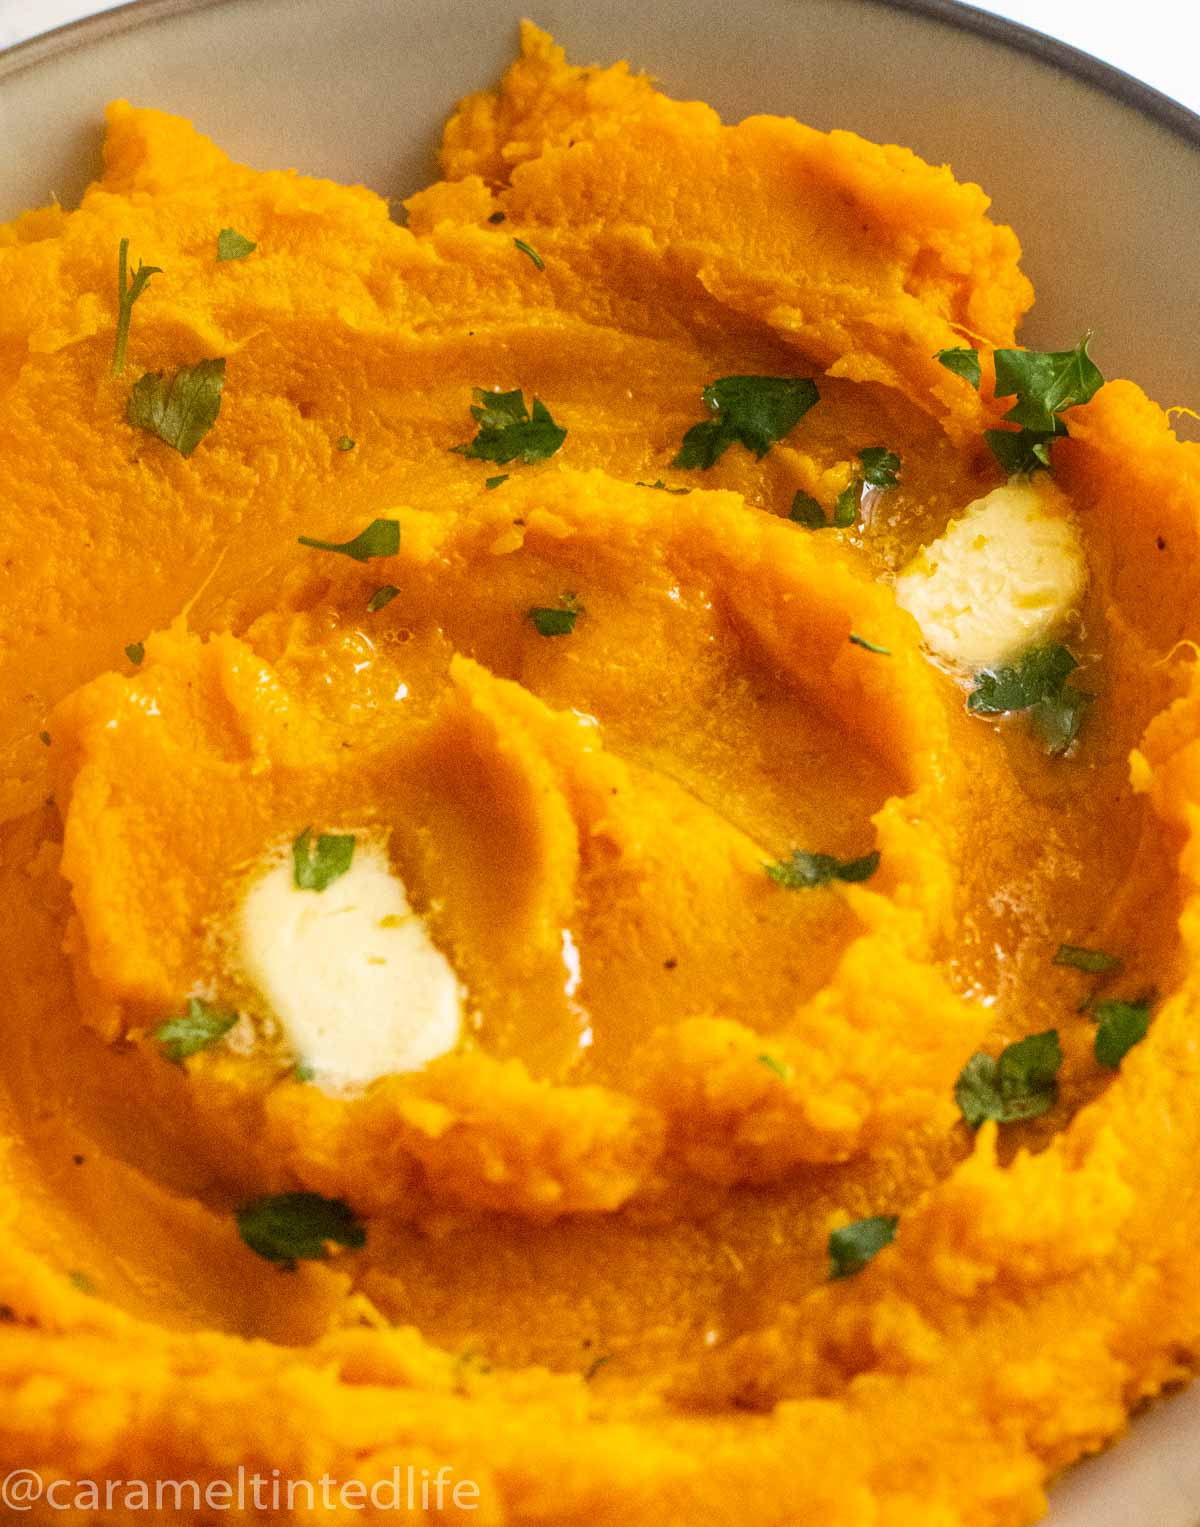 Cloesup of creamy mashed sweet potatoes with melted butter